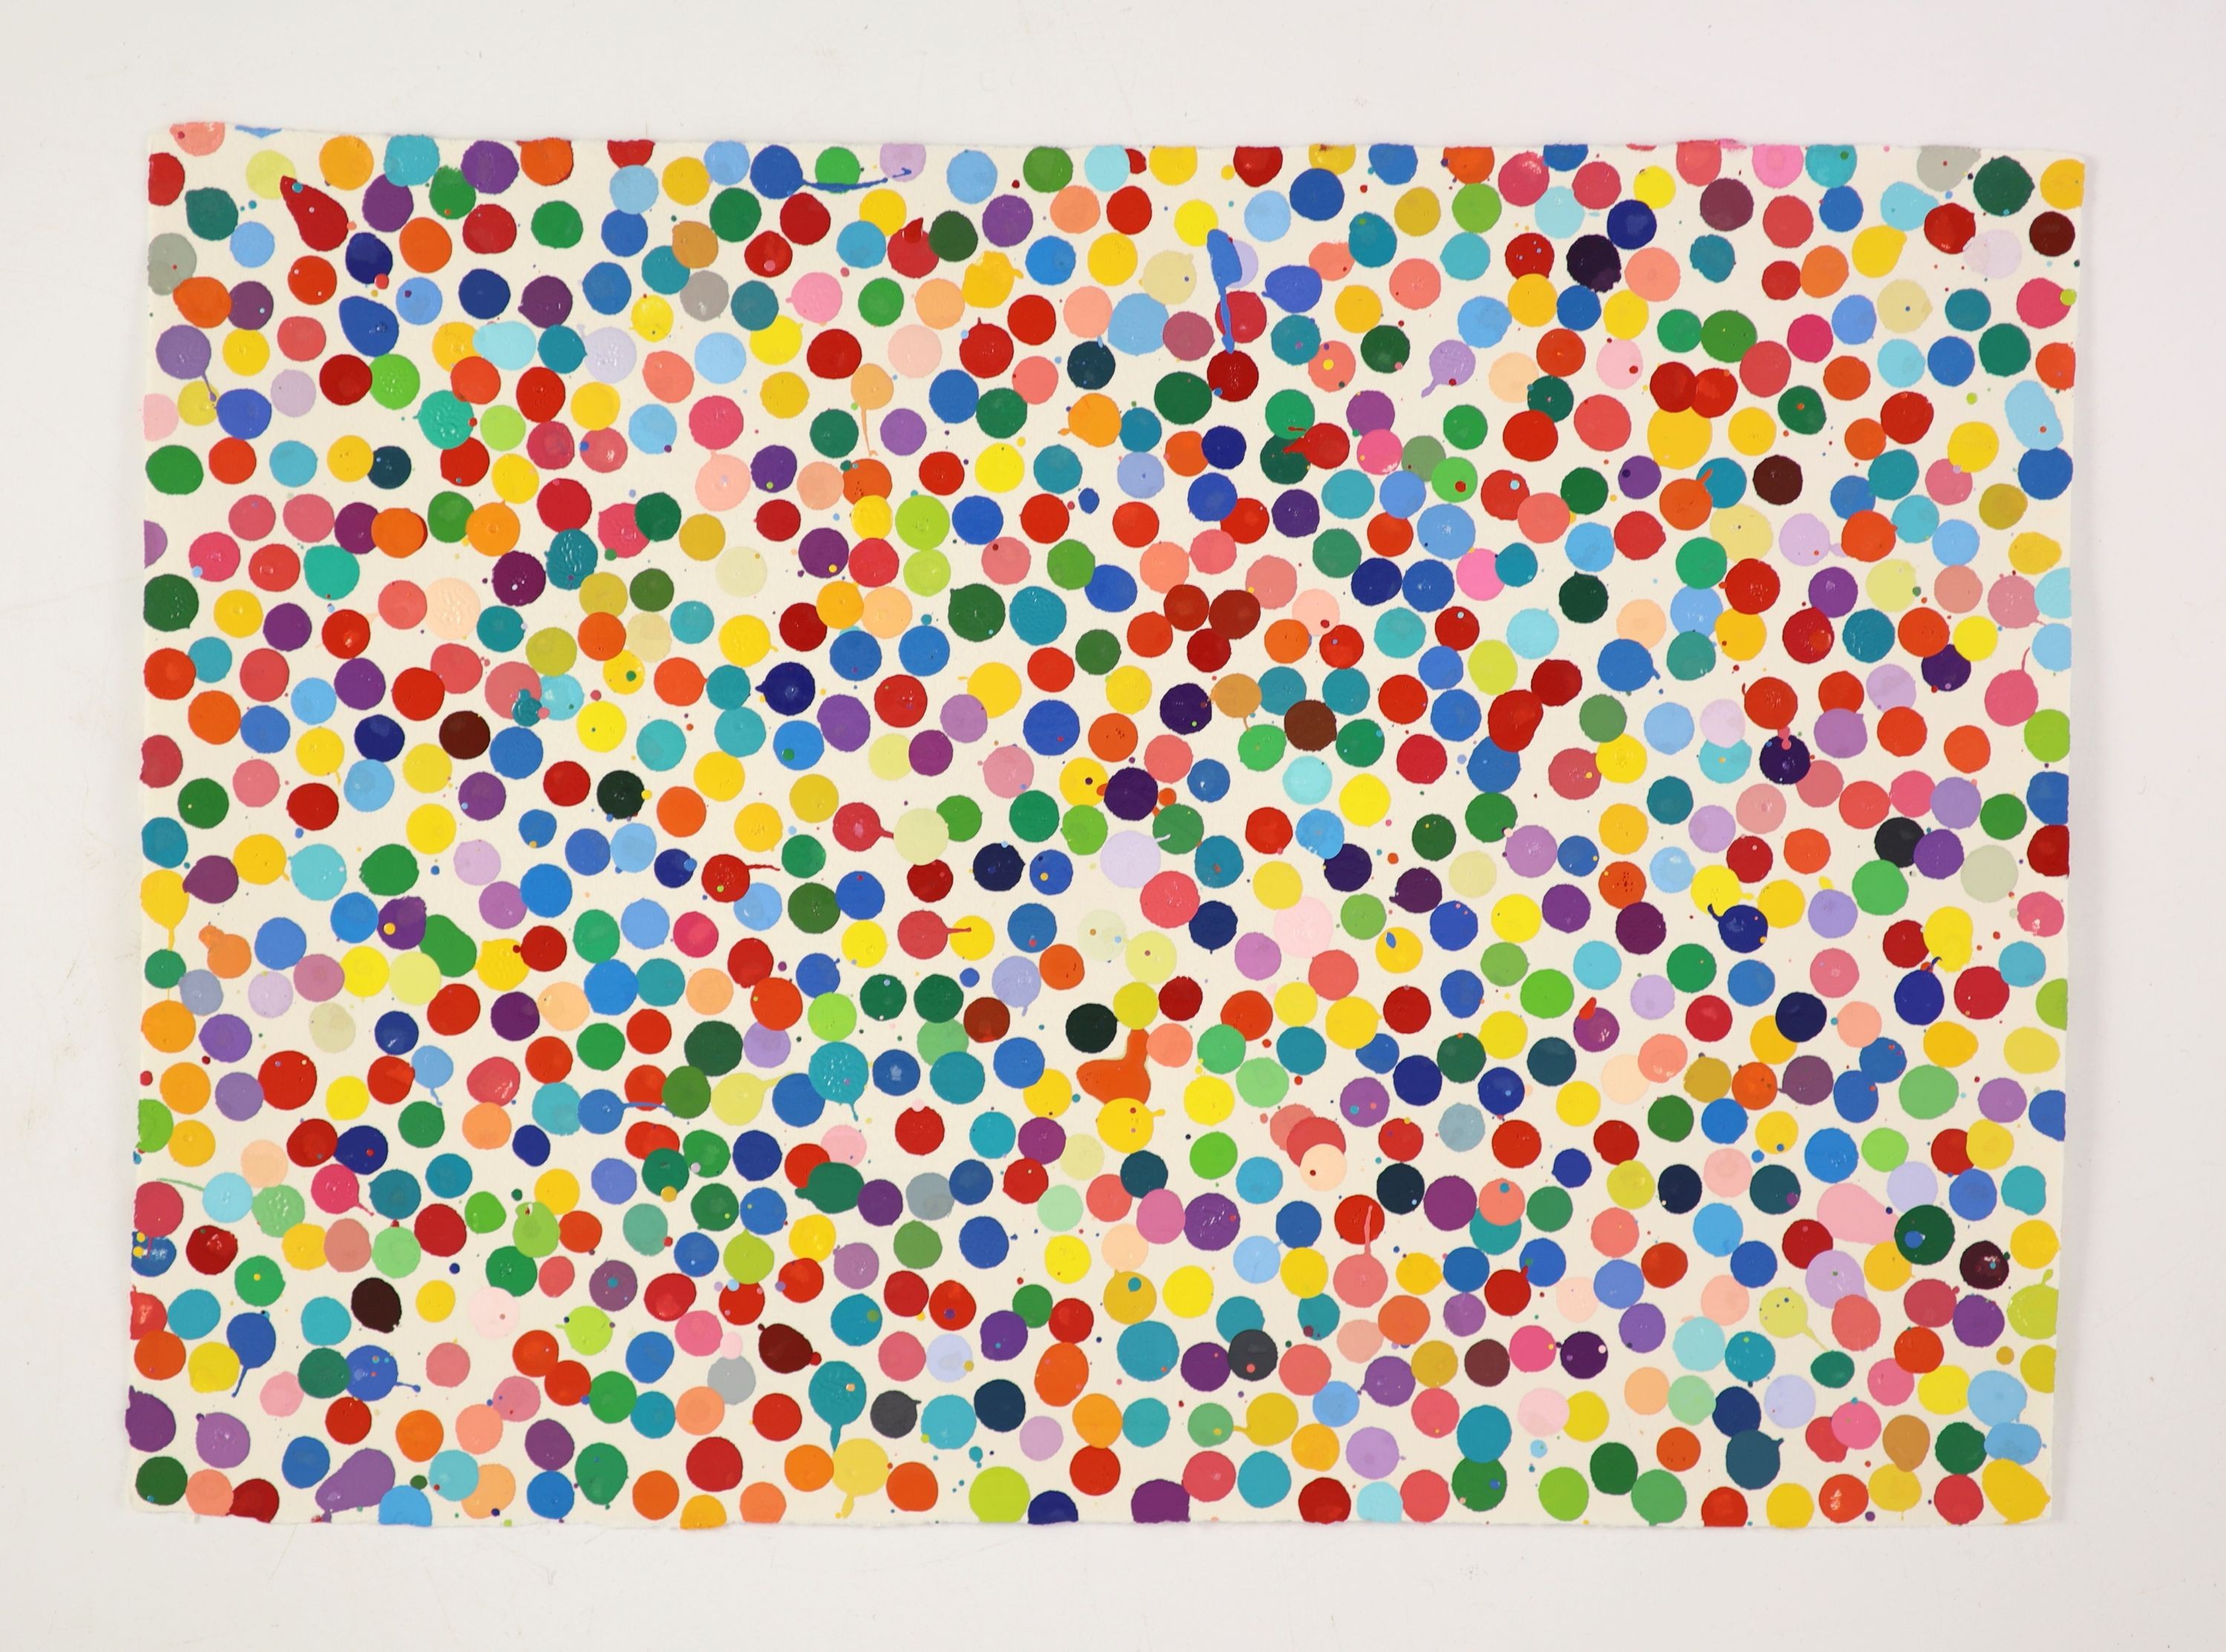 Damien Hirst (1965-), 'Enclosing Doors, 2016' from the Currency Series, paint on A4 paper, 21 x 29.5 cm. unmounted.